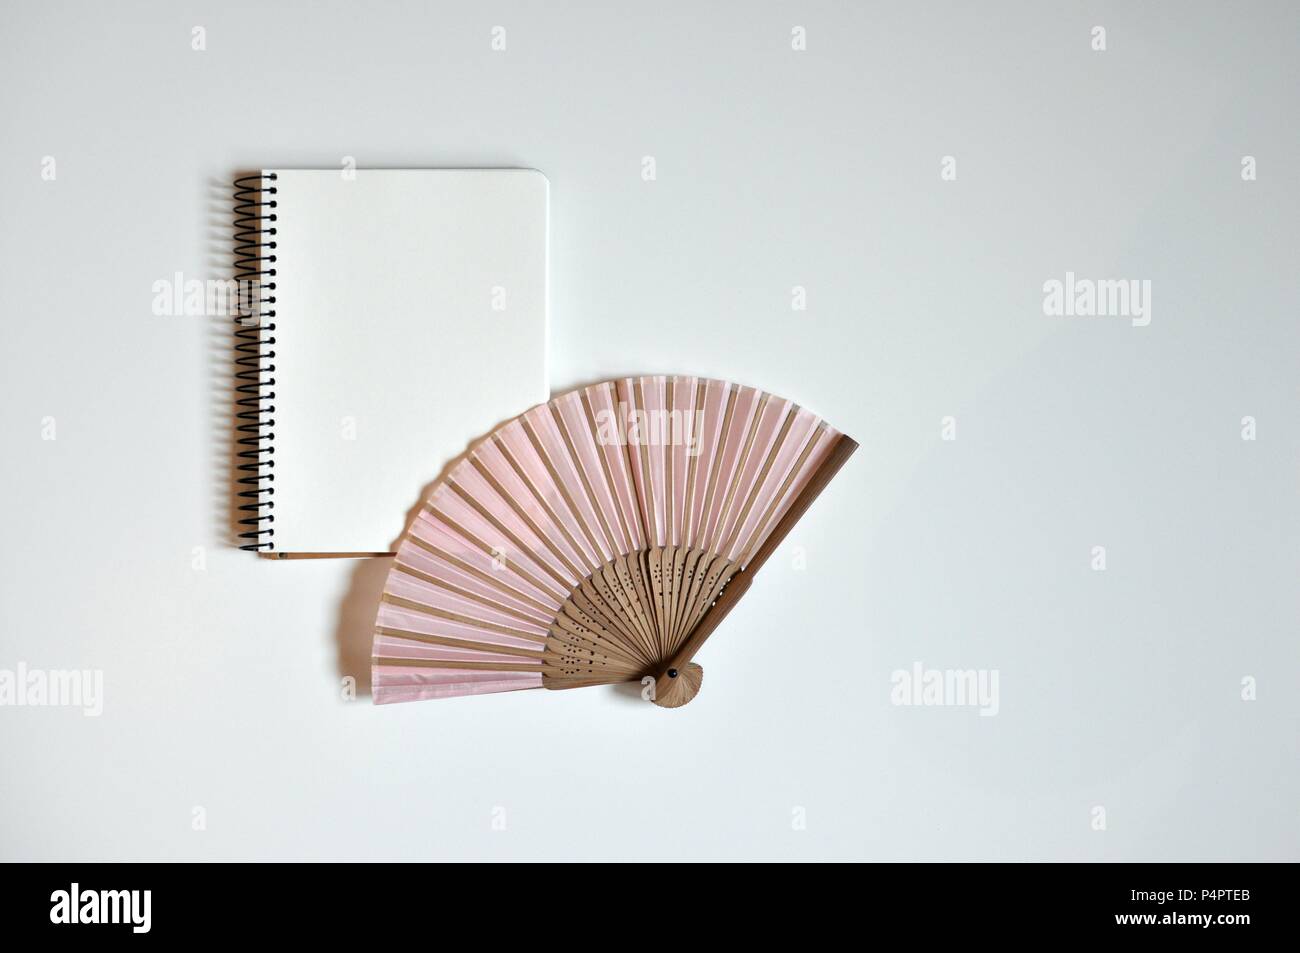 Pink fan and notebook in the middle on white background, flat lay, copy space, minimalist style Stock Photo